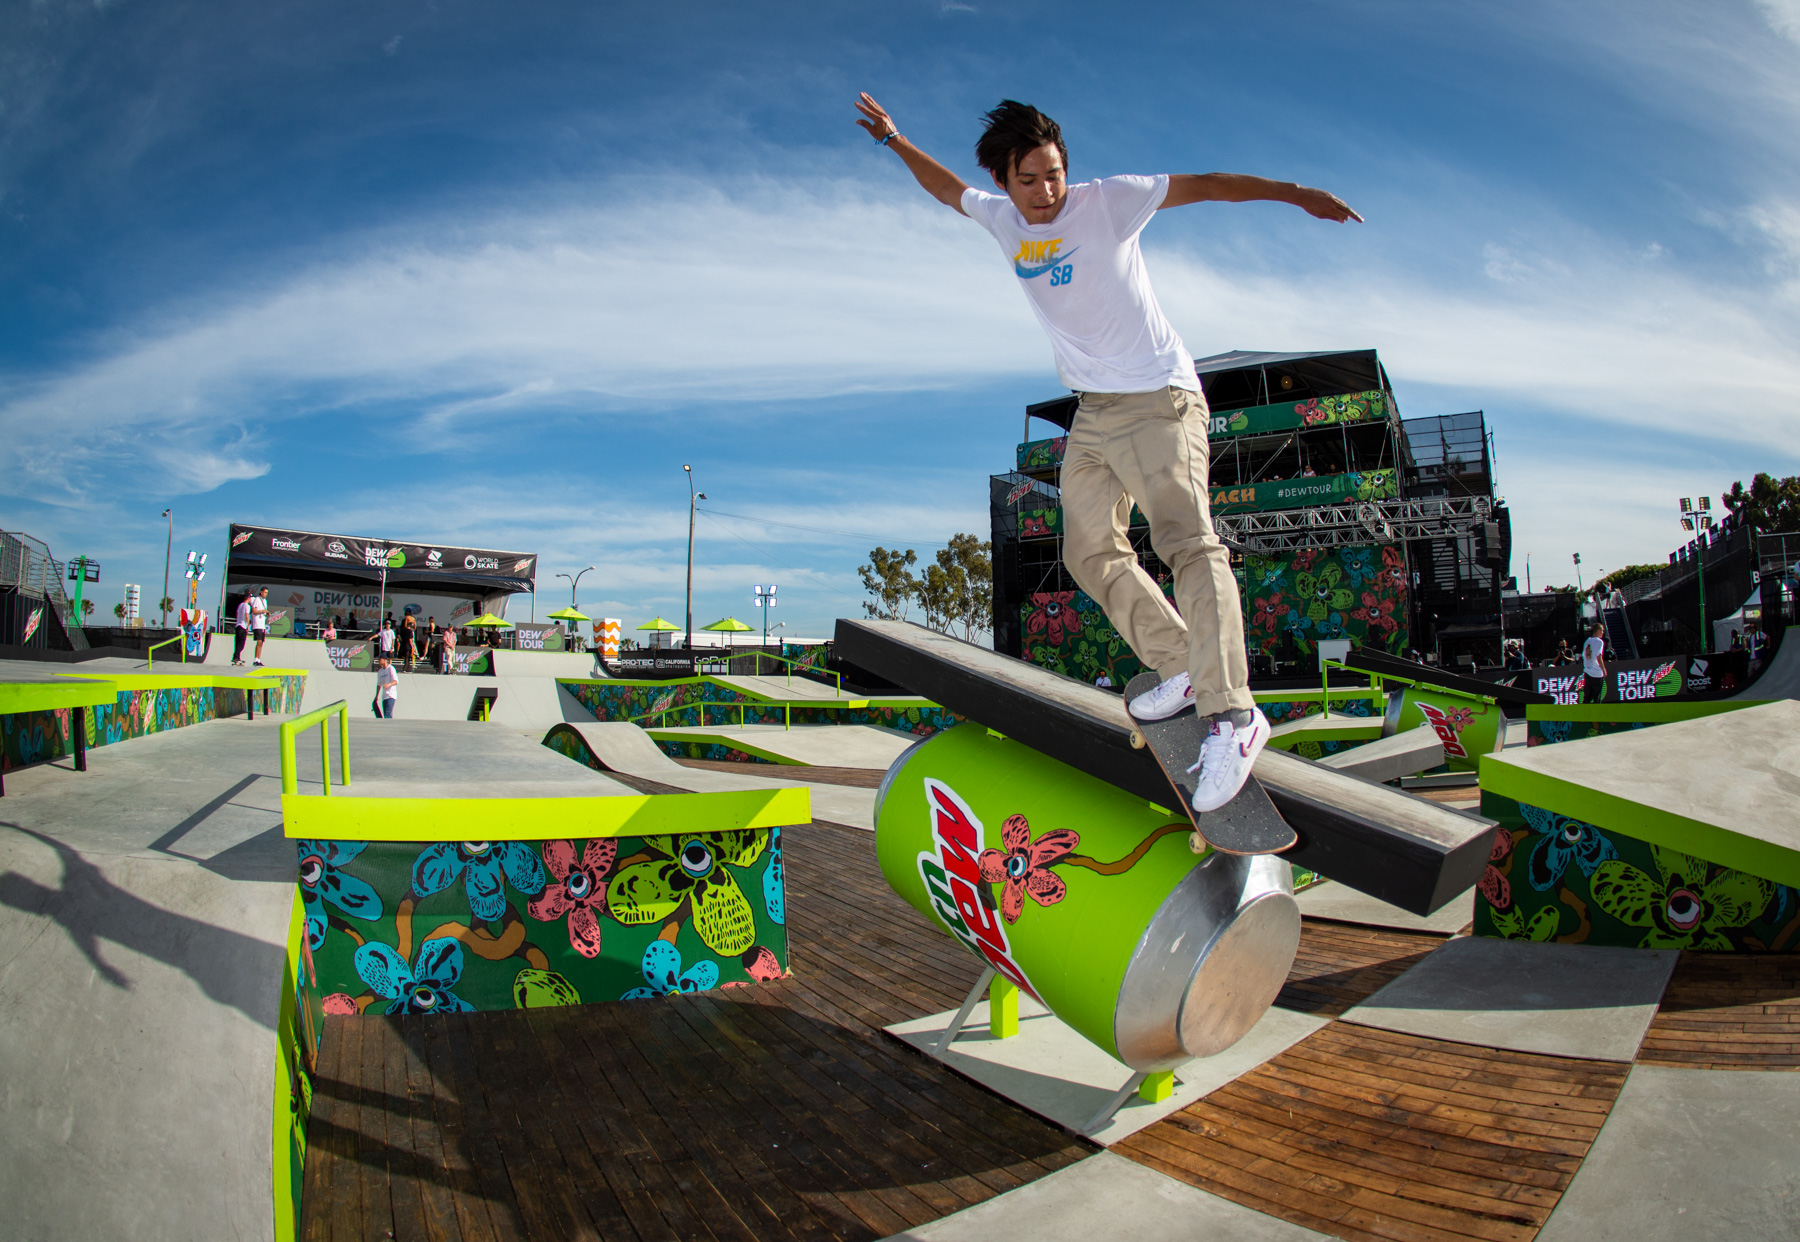 PHOTO: Sean Malto, 30, is vying for a spot at the 2020 Olympics in skateboarding.